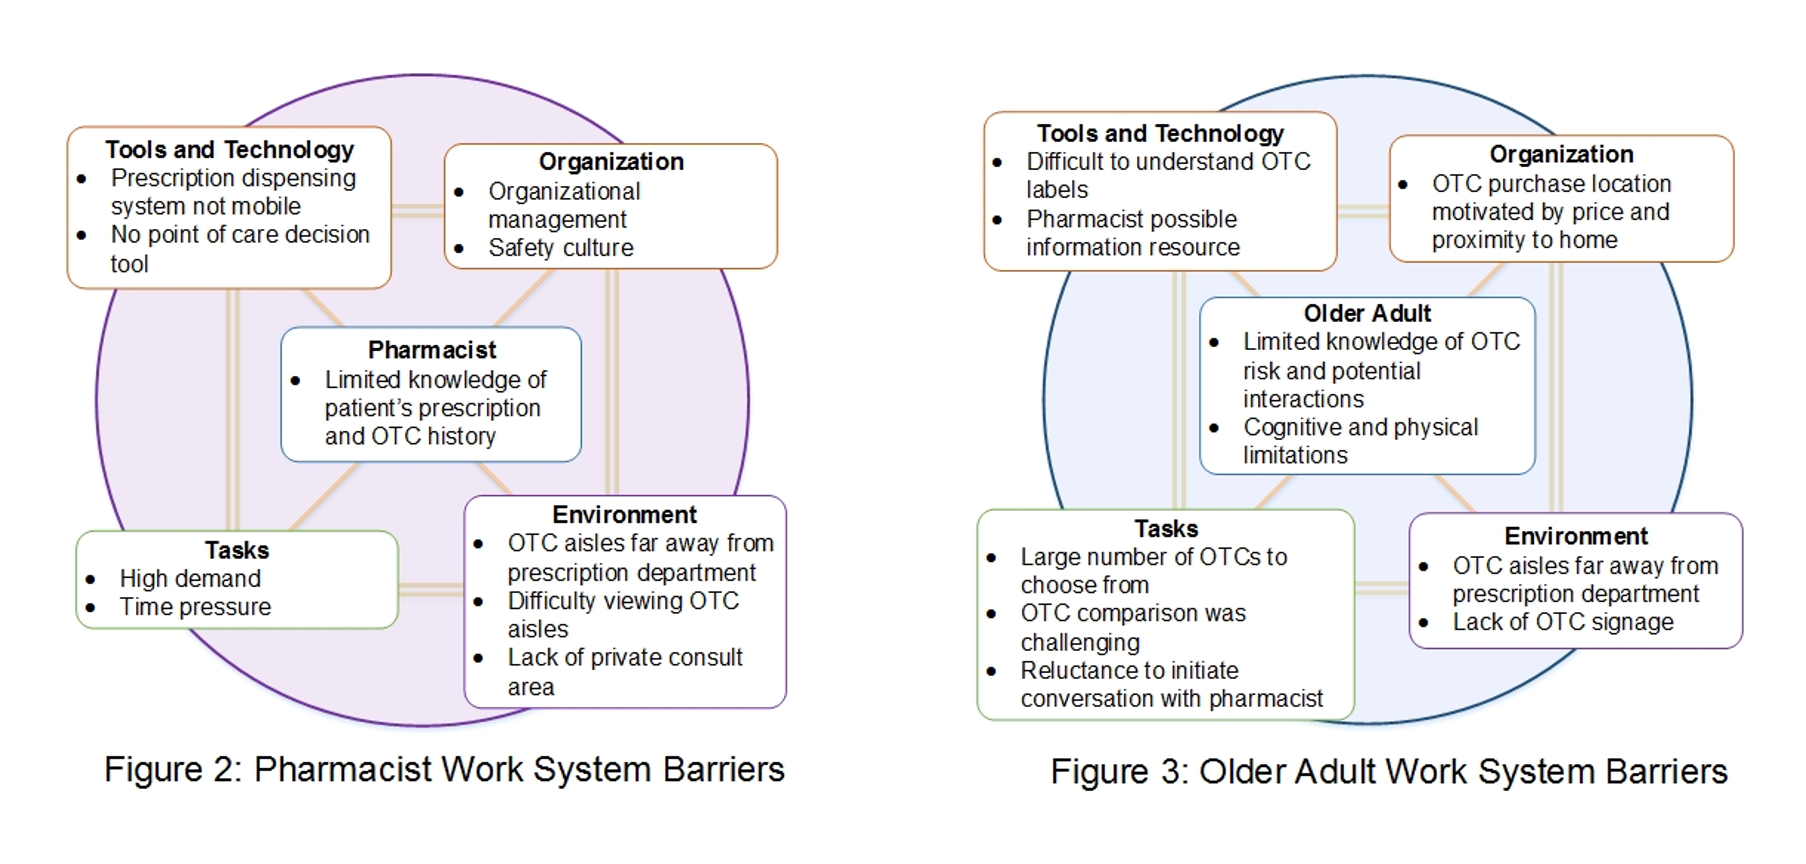 Barriers graphics Fig 2 detailing Pharmacist Work System Barriers, and Fig 3 detailing Older Adult Work System Barriers